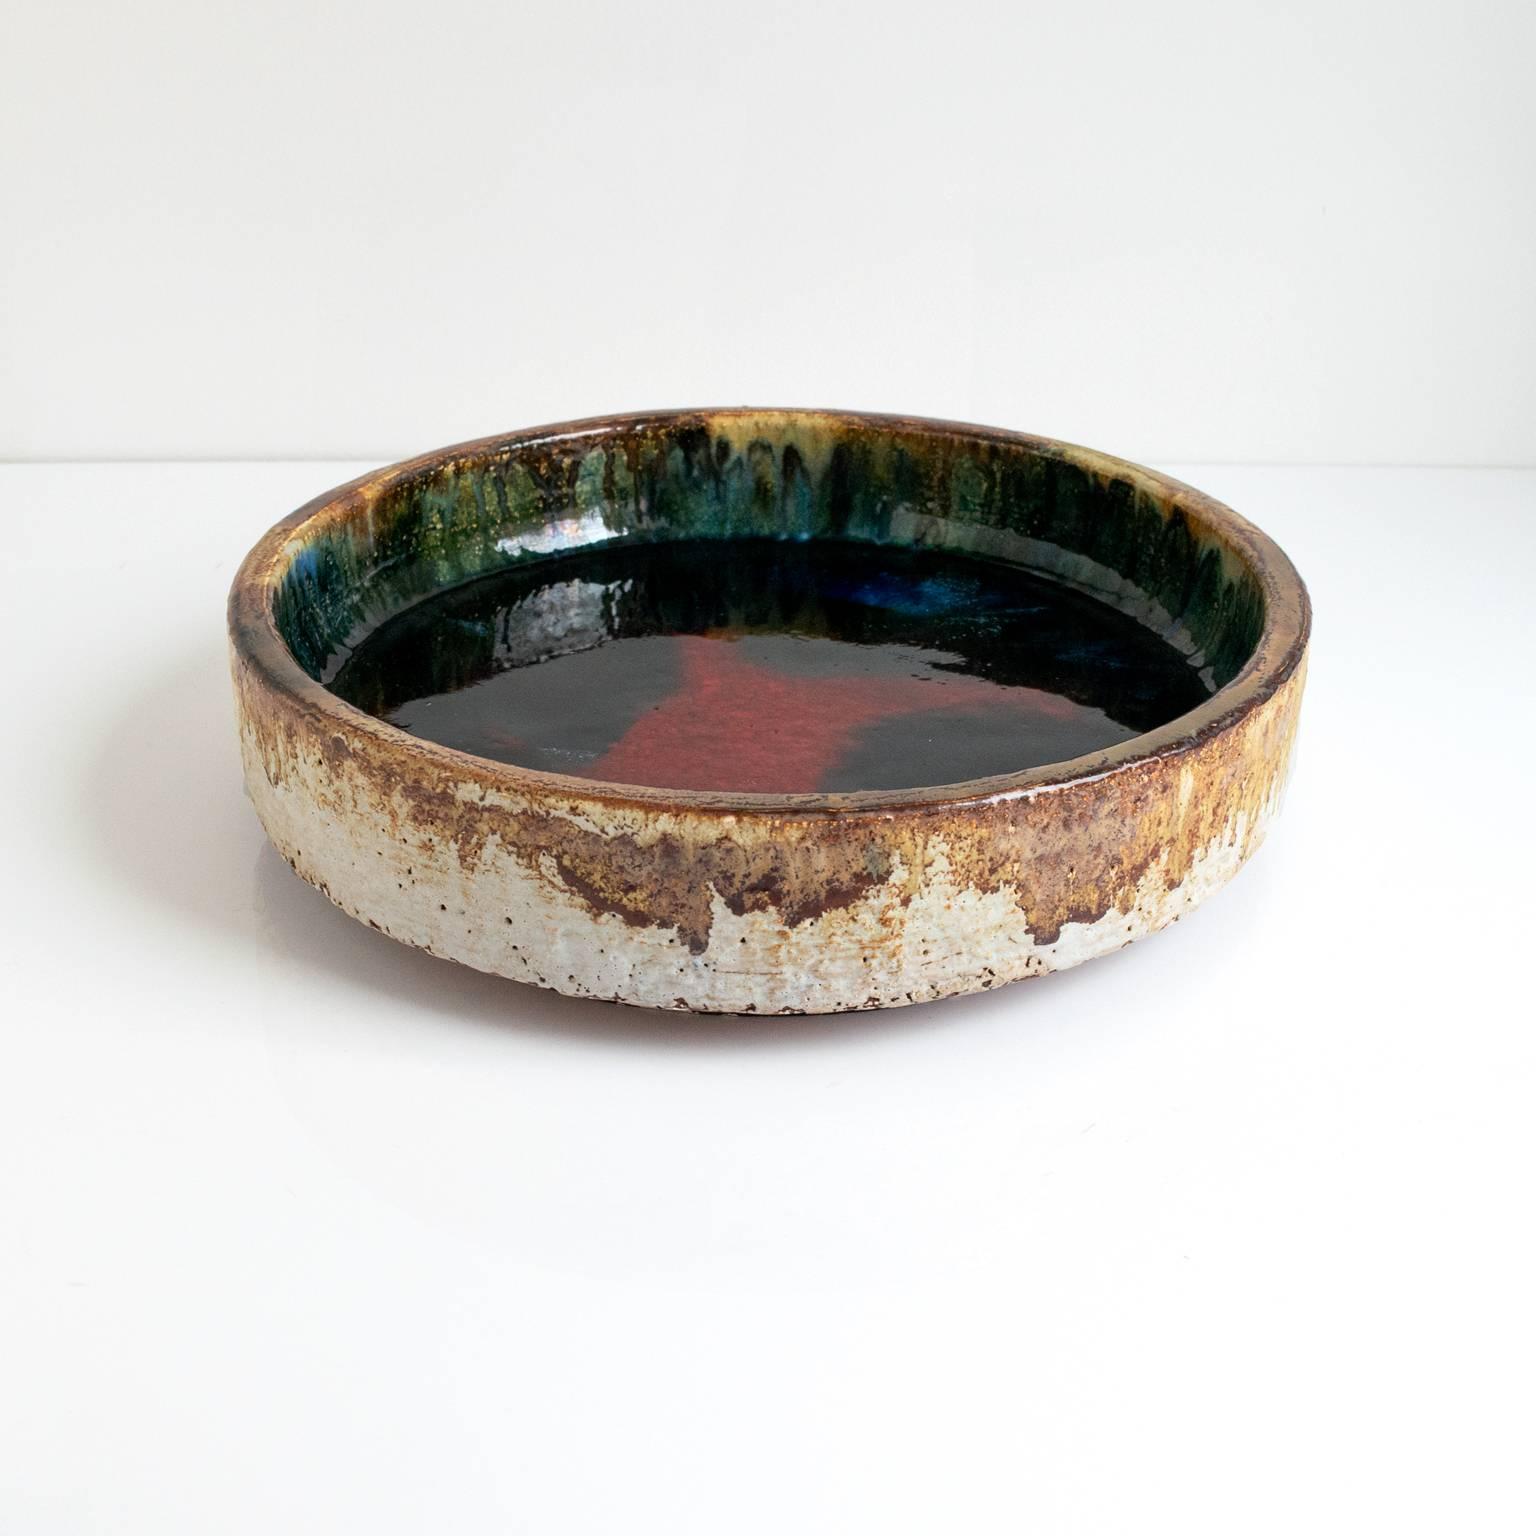 A large expressionistic midcentury Scandinavian Modern multicolored thickly glazed bowl.

Dimensions: Diameter 12, height 3”.